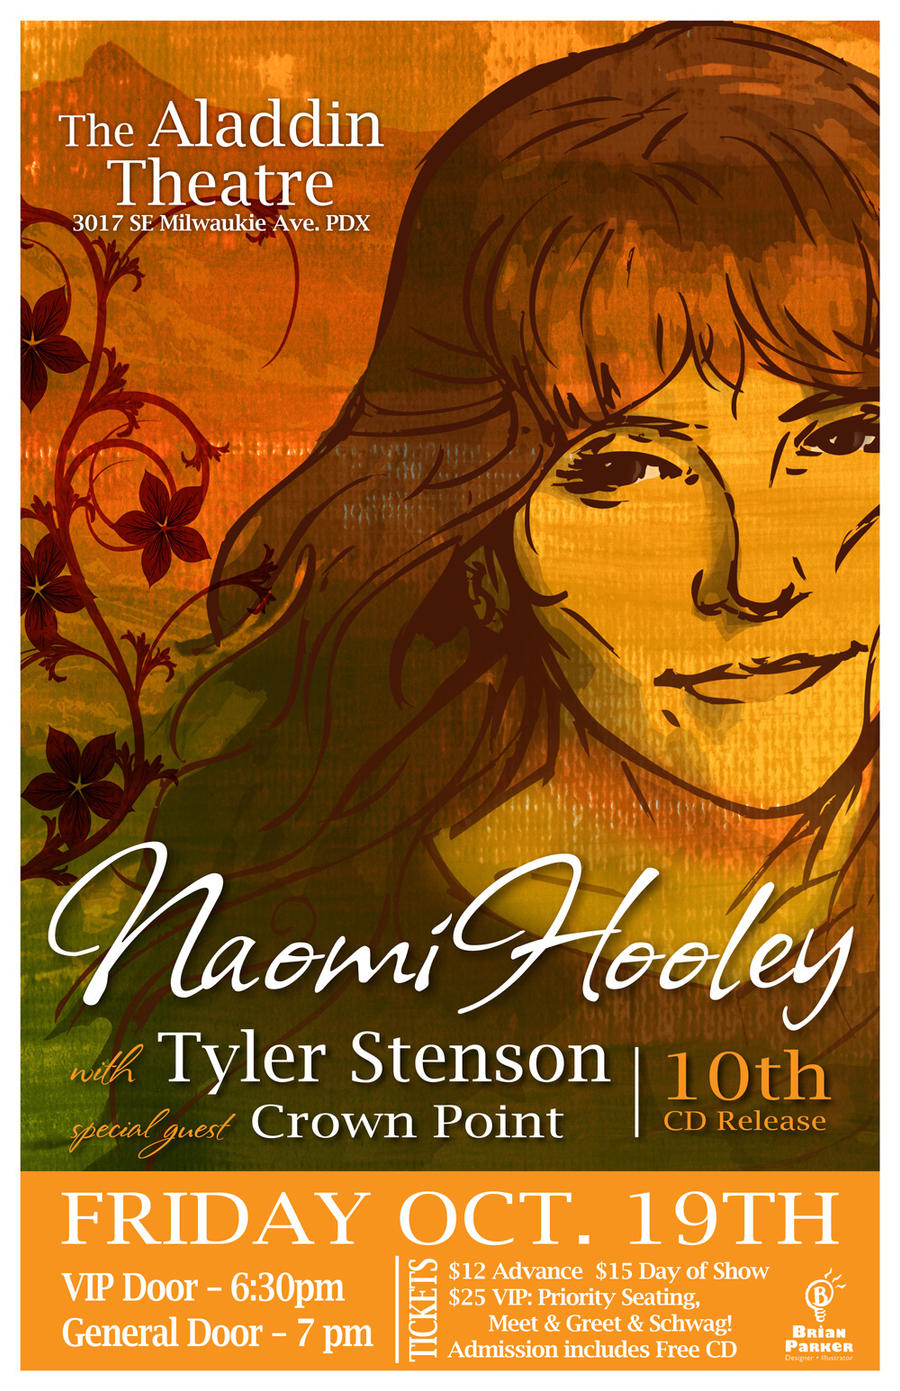 Naomi Hooley_10th CD Release Poster